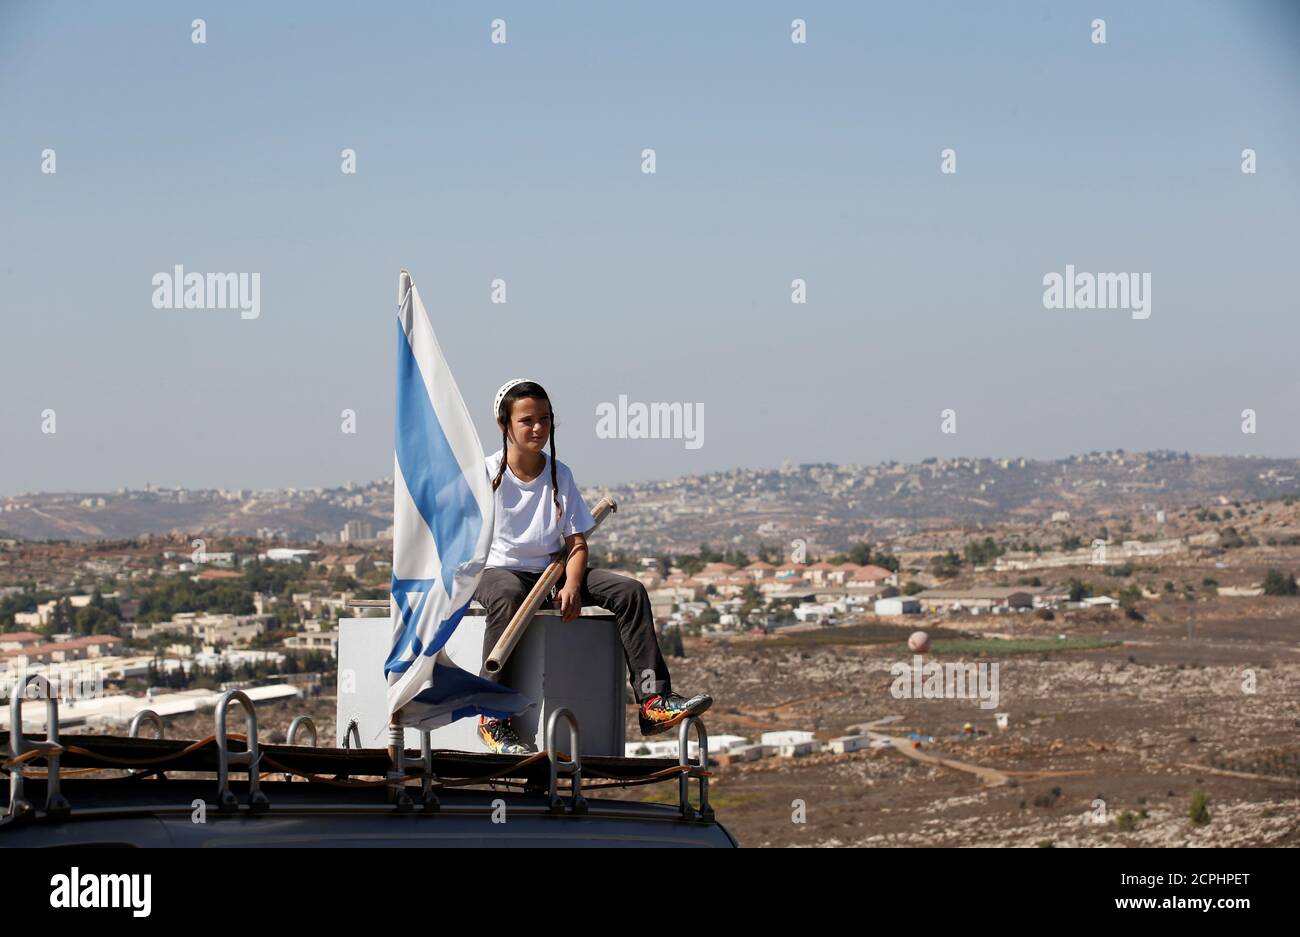 A boy sits near an israeli flag atop the roof of a vehicle at the entrance to the Jewish settler outpost of Amona in the West Bank, during an event organised to show support for Amona which was built without Israeli state authorisation and which Israel's high court ruled must be evacuated and demolished by the end of the year as it is built on privately-owned Palestinian land, October 20, 2016. REUTERS/Ronen Zvulun Stock Photo